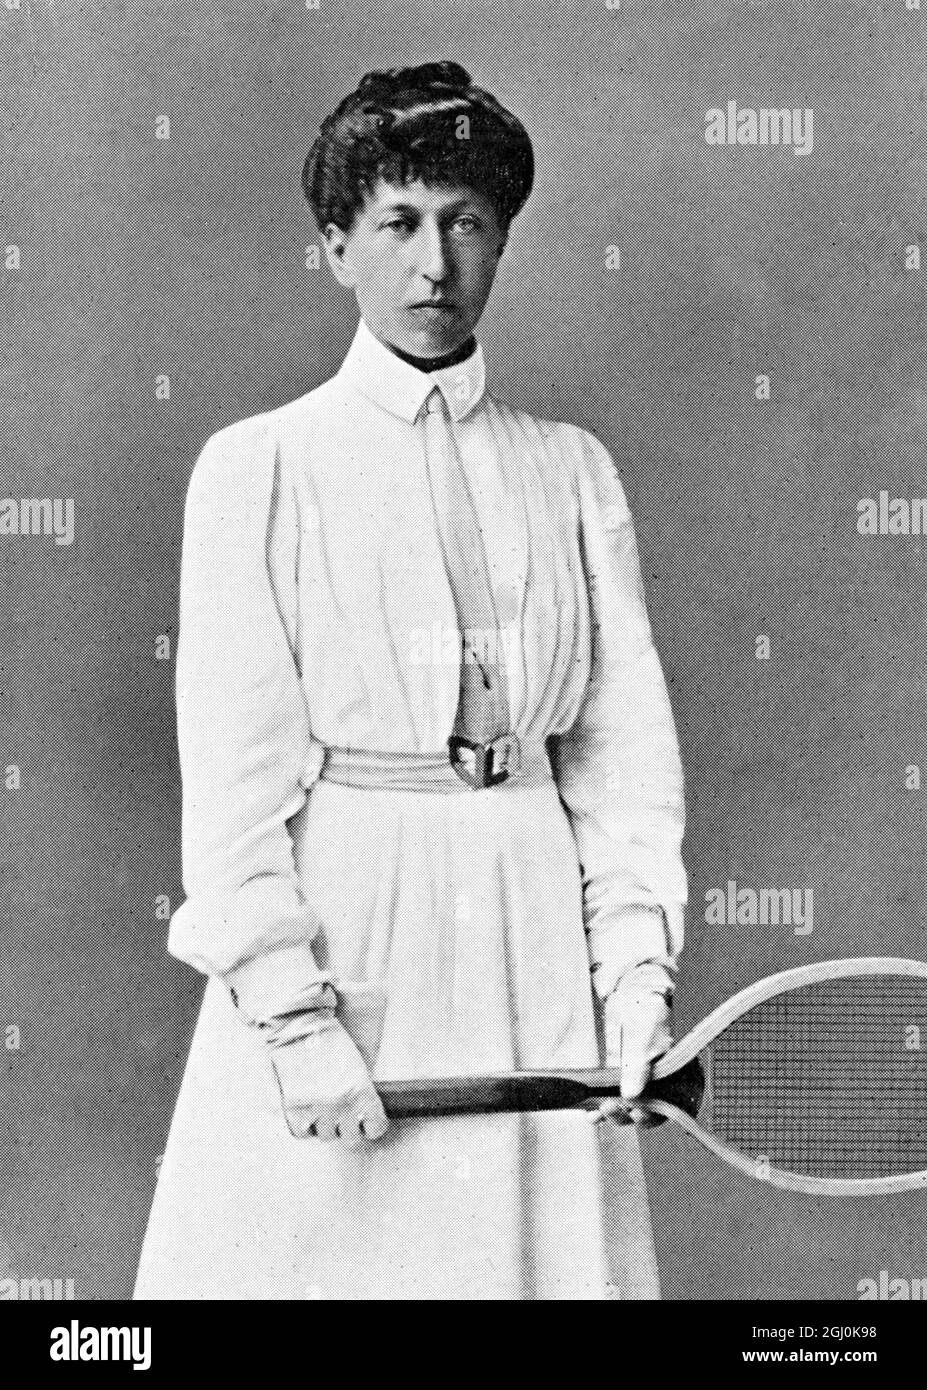 Miss Hillyard in 1894 - Blanche Hillyard - Wimbledon Championships - ladies' singles champion in 1886, 1889, 1894, 1897, 1899 and 1900 10 June 1894 ©TopFoto Stock Photo